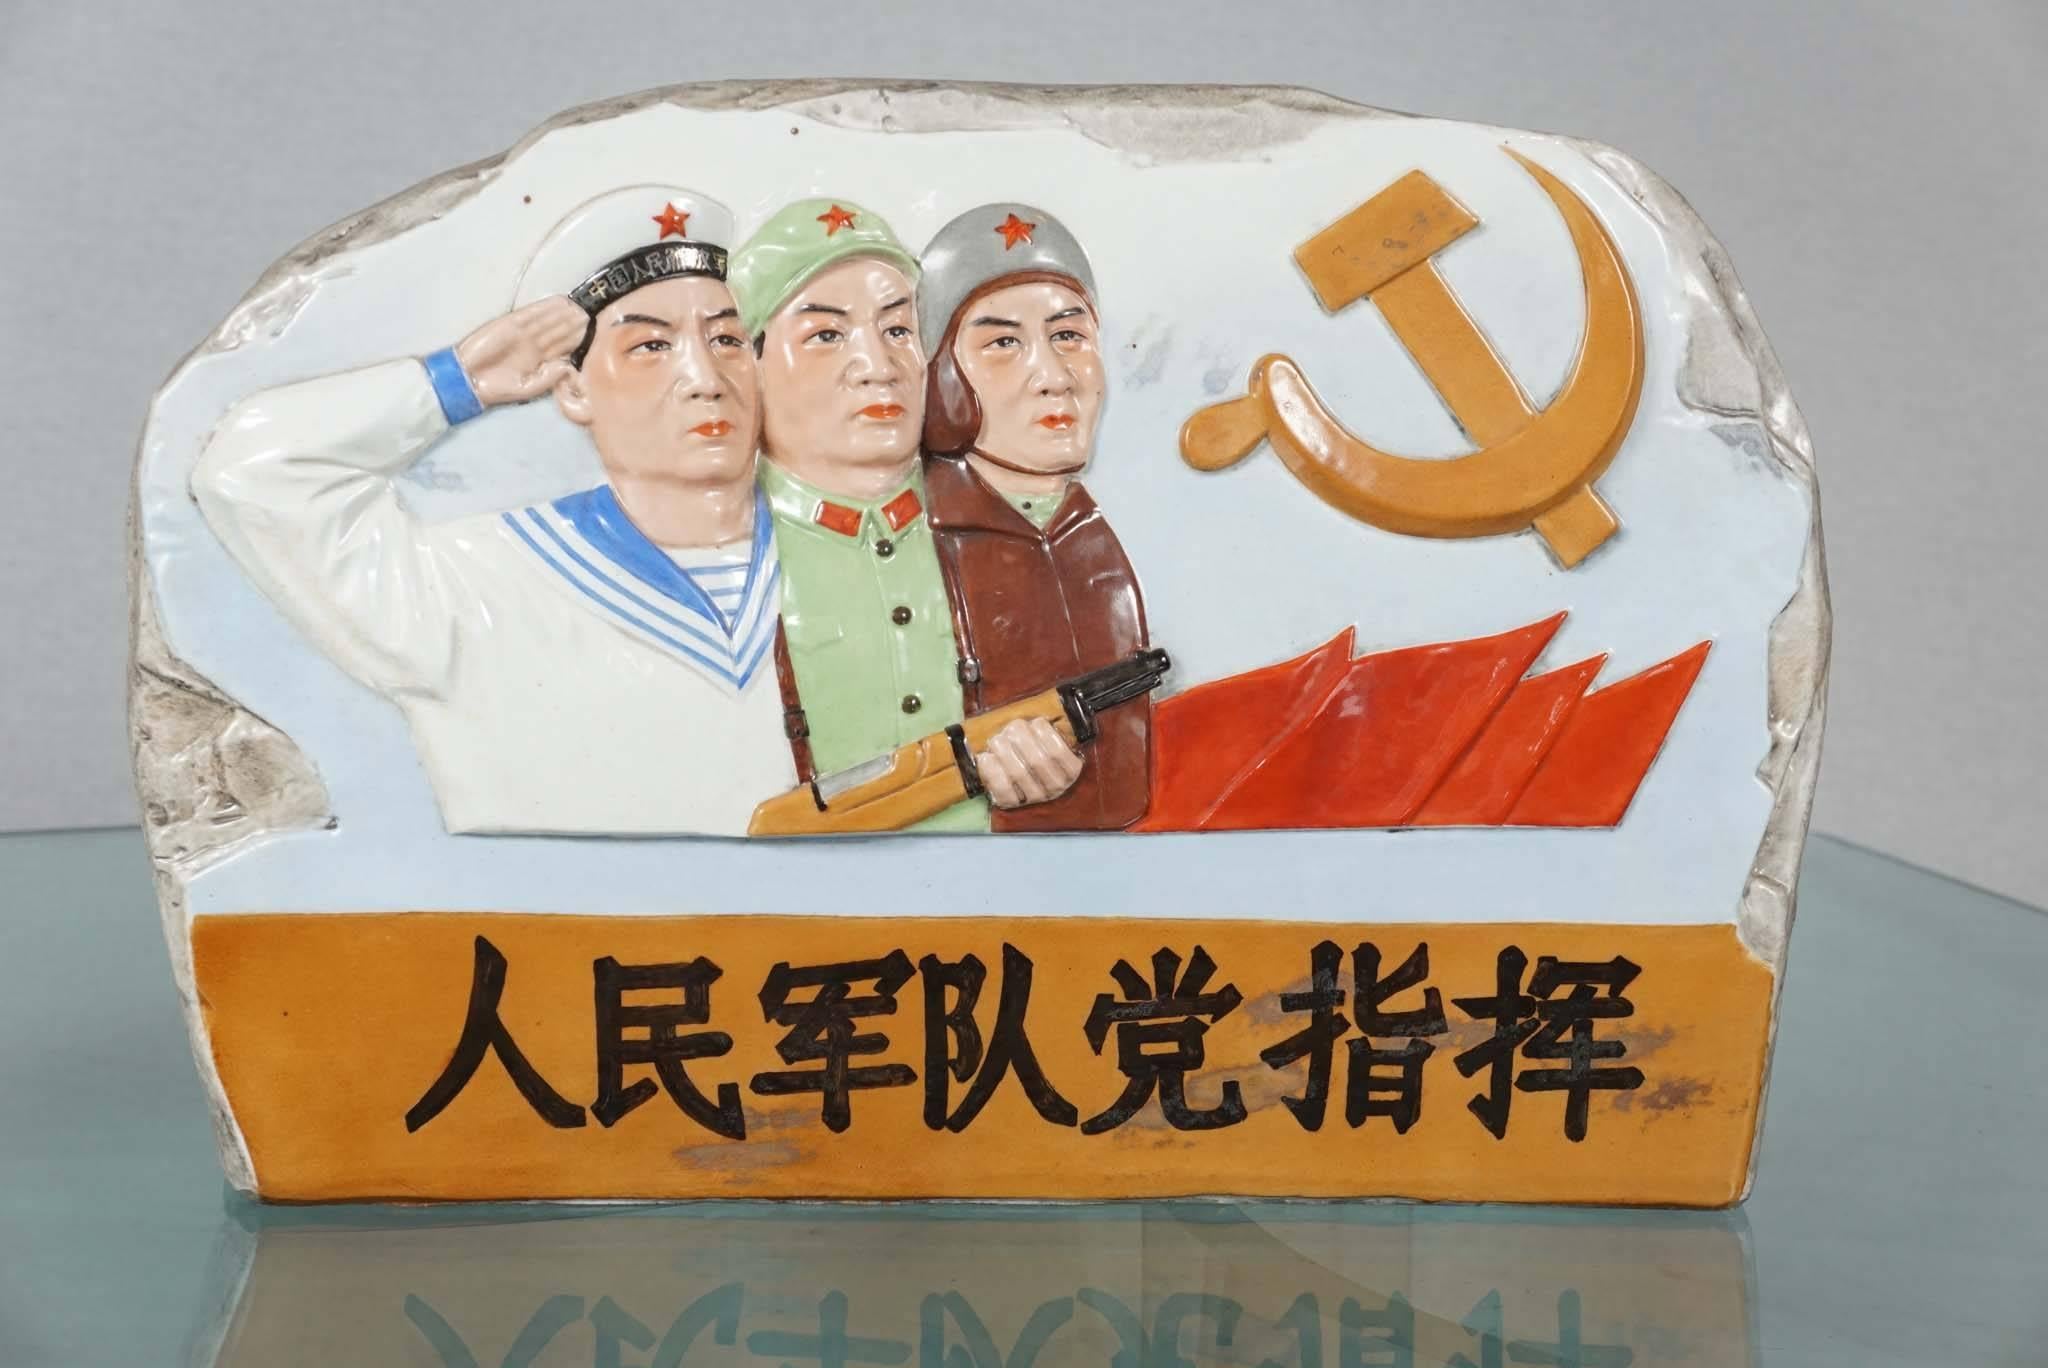 This porcelain Cultural Revolution period figurine features the three branches of the People's Army.

From Wikipedia: 
The Cultural Revolution, formally the Great Proletarian Cultural Revolution, was a social-political movement that took place in